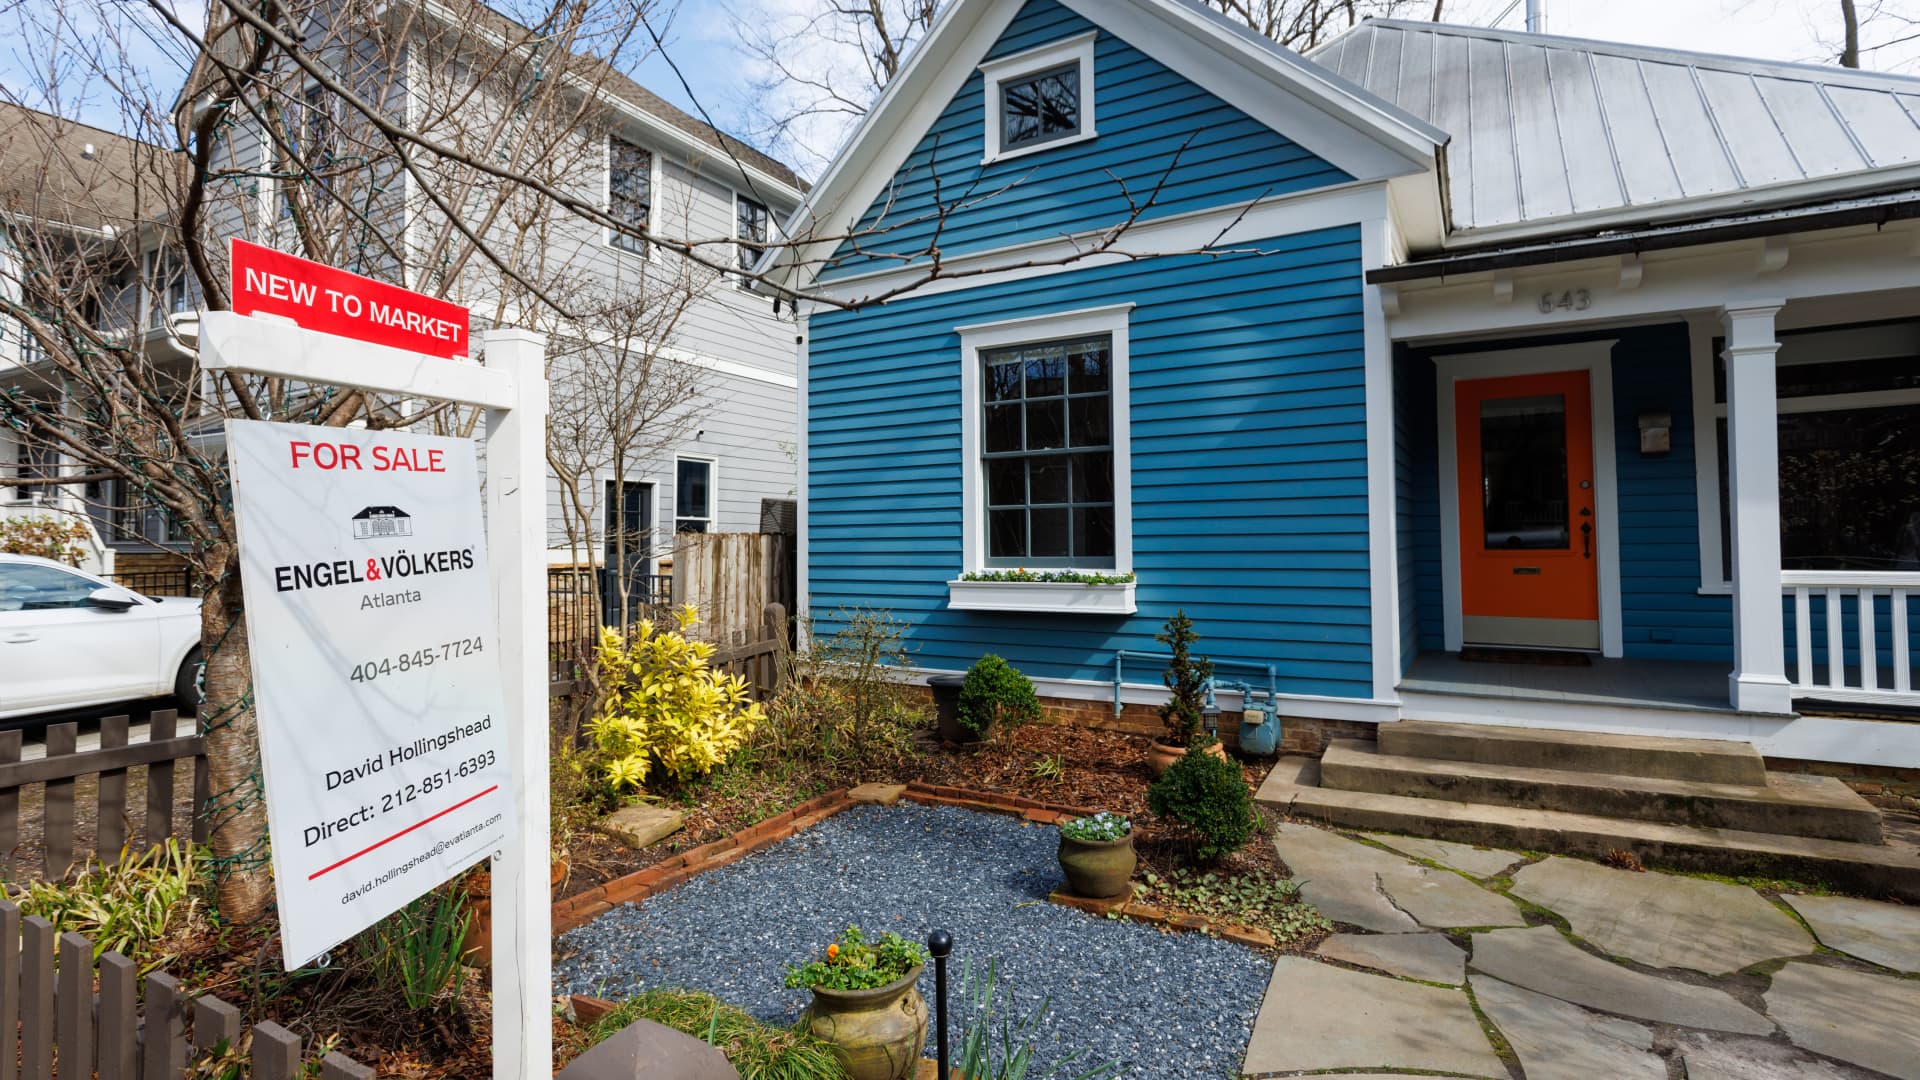 Home prices rise after several months of declines